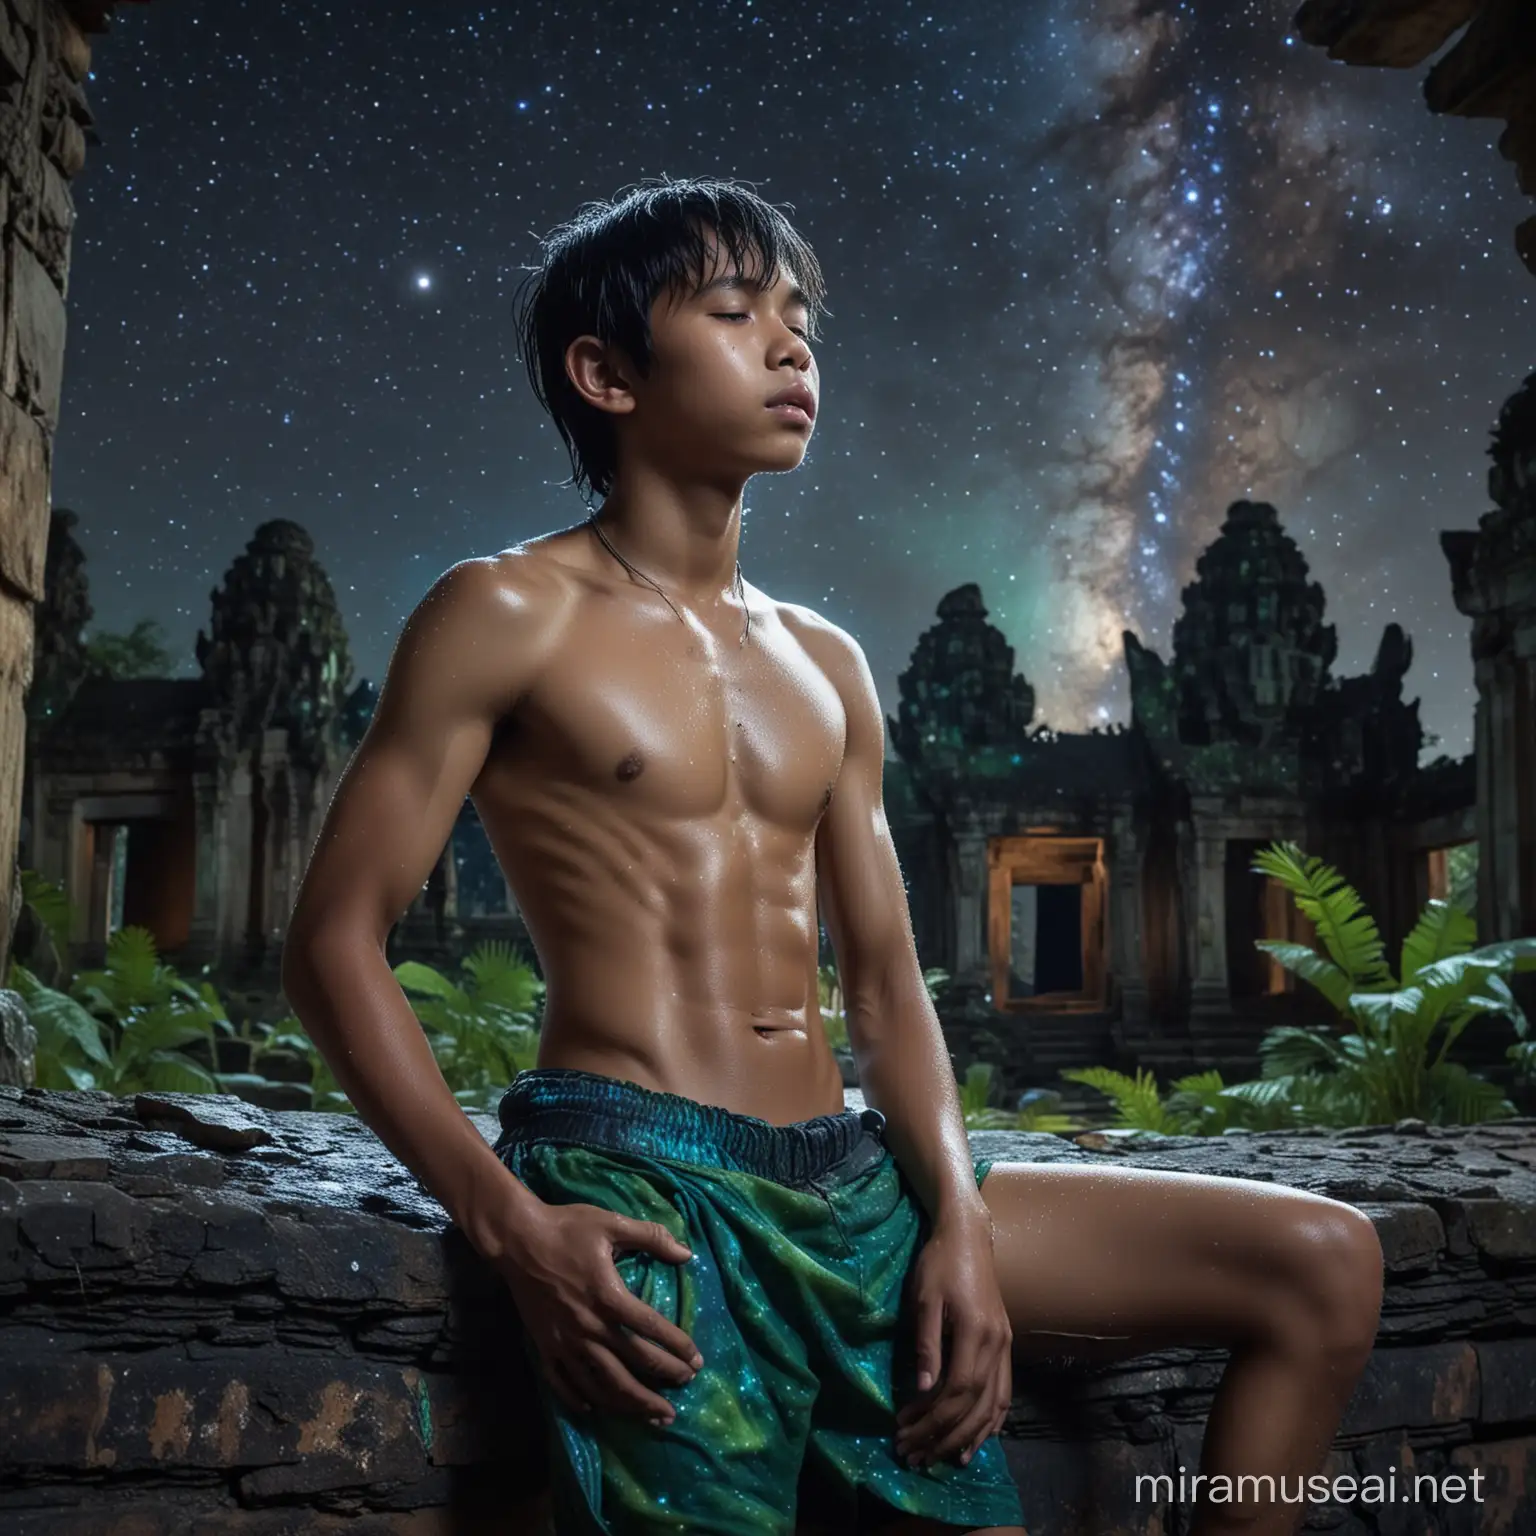 Athletic Shirtless Mowgli Sleeping in Cambodian Temple Ruins at Night